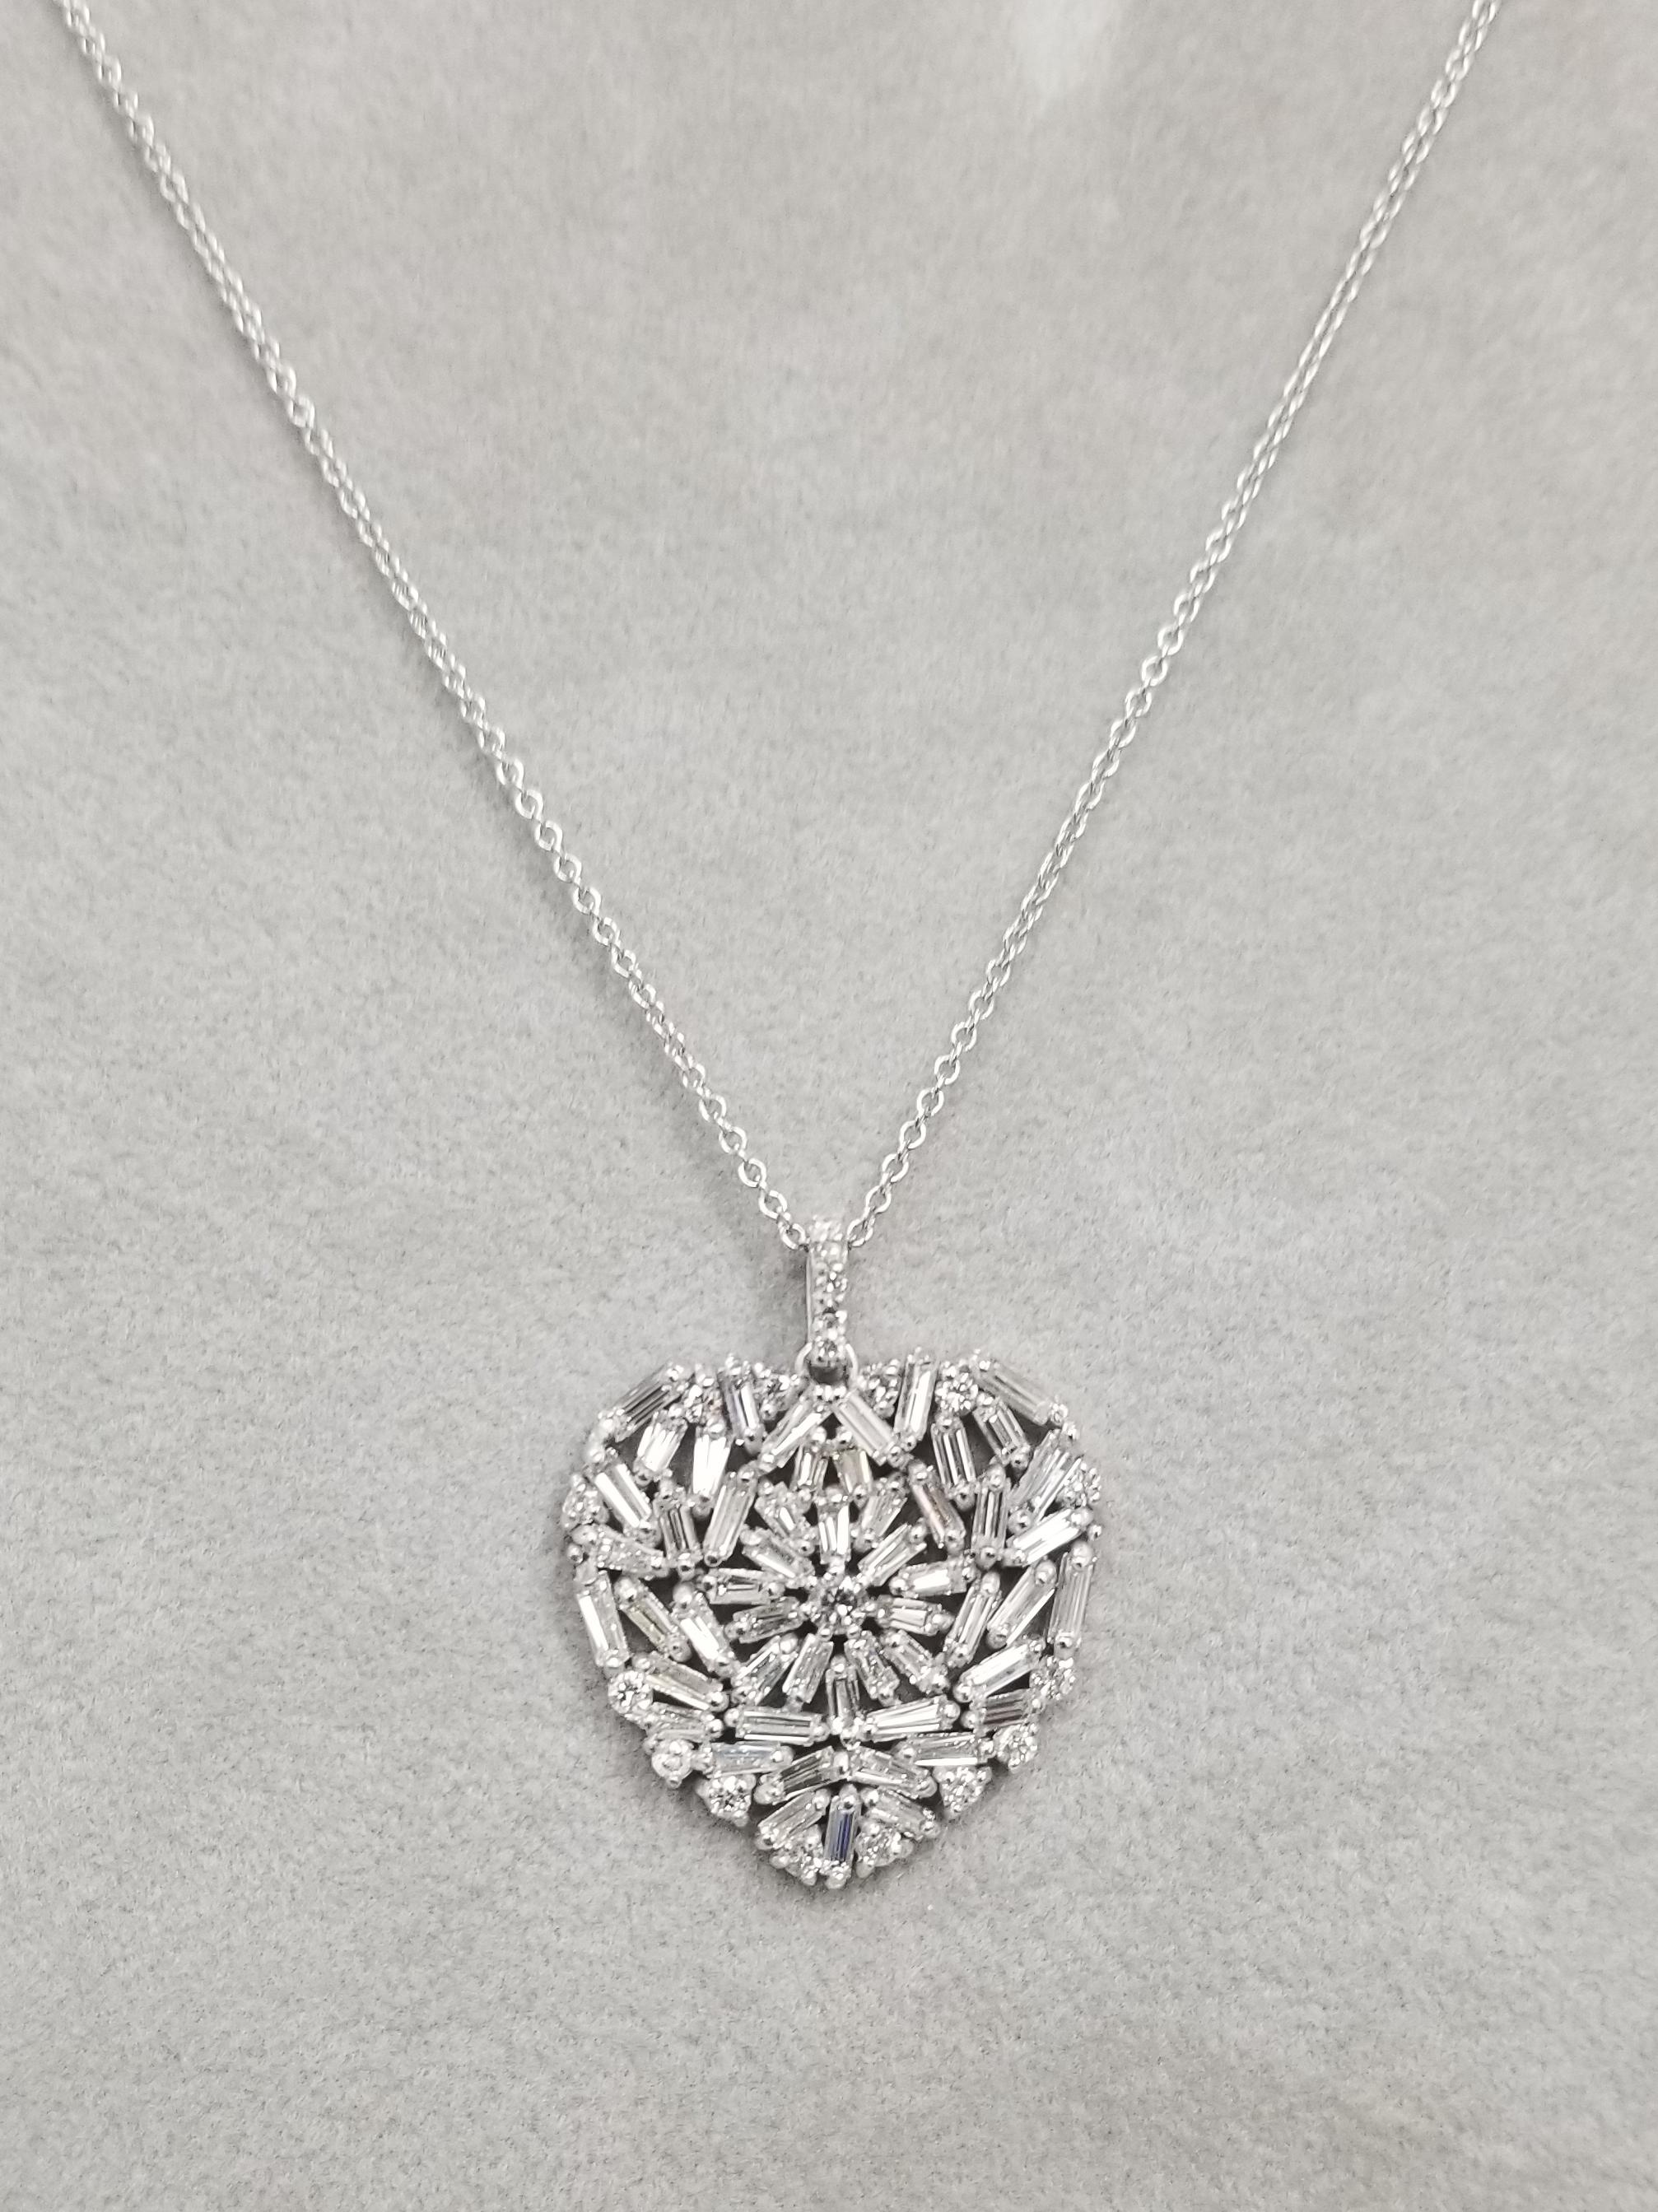 Beautiful baguette and round diamond heart set in 14k white gold.
Specifications:
    main stone: BAGUETTE CUT DIAMONDS
    diamonds: 52 PCS
    carat total weight: 2.35cts.
    color: G
    clarity: VS2-SI1
    second: ROUND CUT DIAMONDS
   